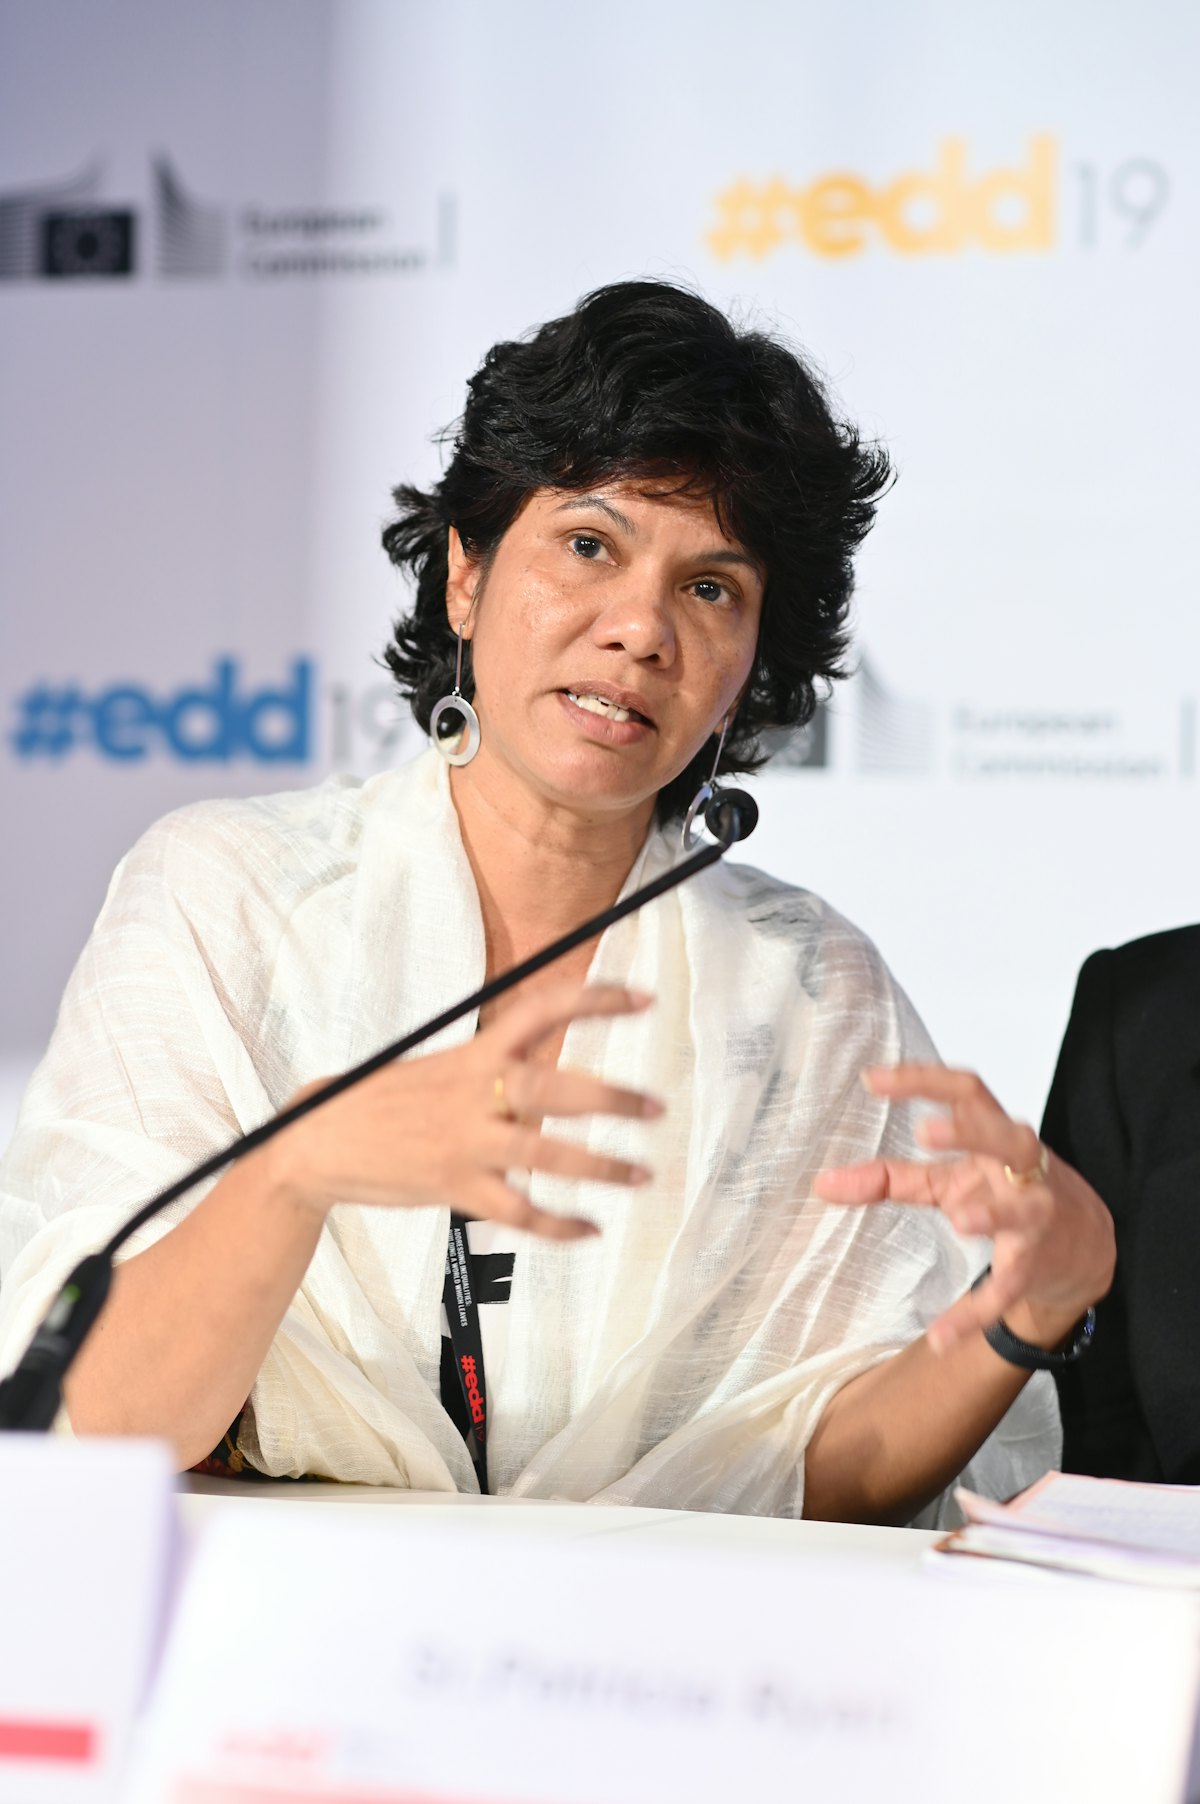 Shreen Abdul Saroor is a co-founder of Mannar Women’s Development Federation (MWDF) and Women’s Action Network. (Credit: EDD Brussels)